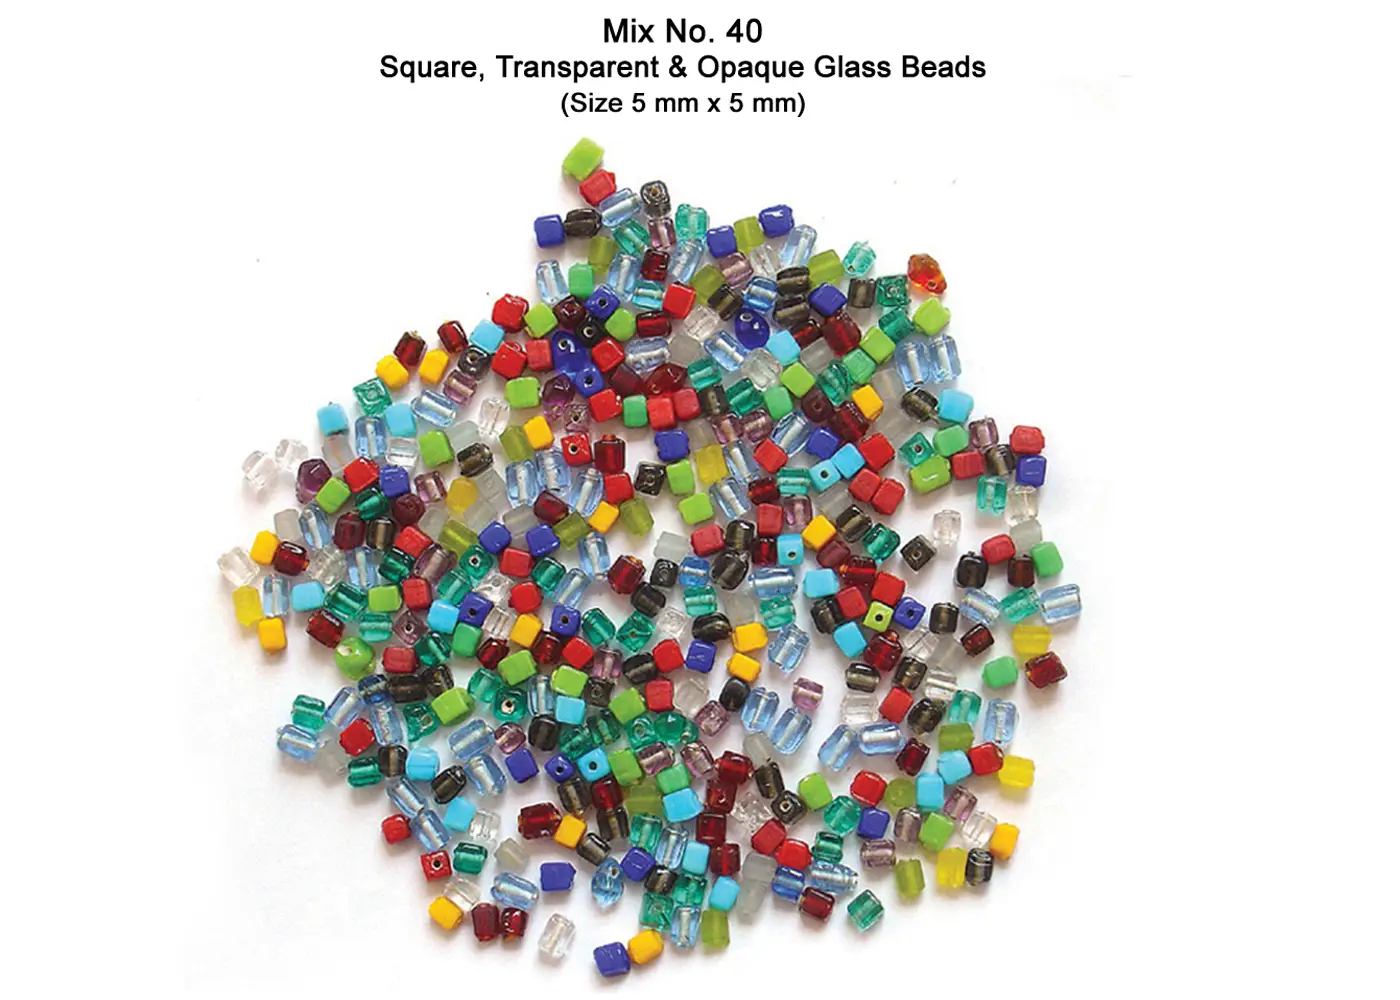 Square, Transparent & Opaque Glass Beads (Size 5 mm x 5 mm)